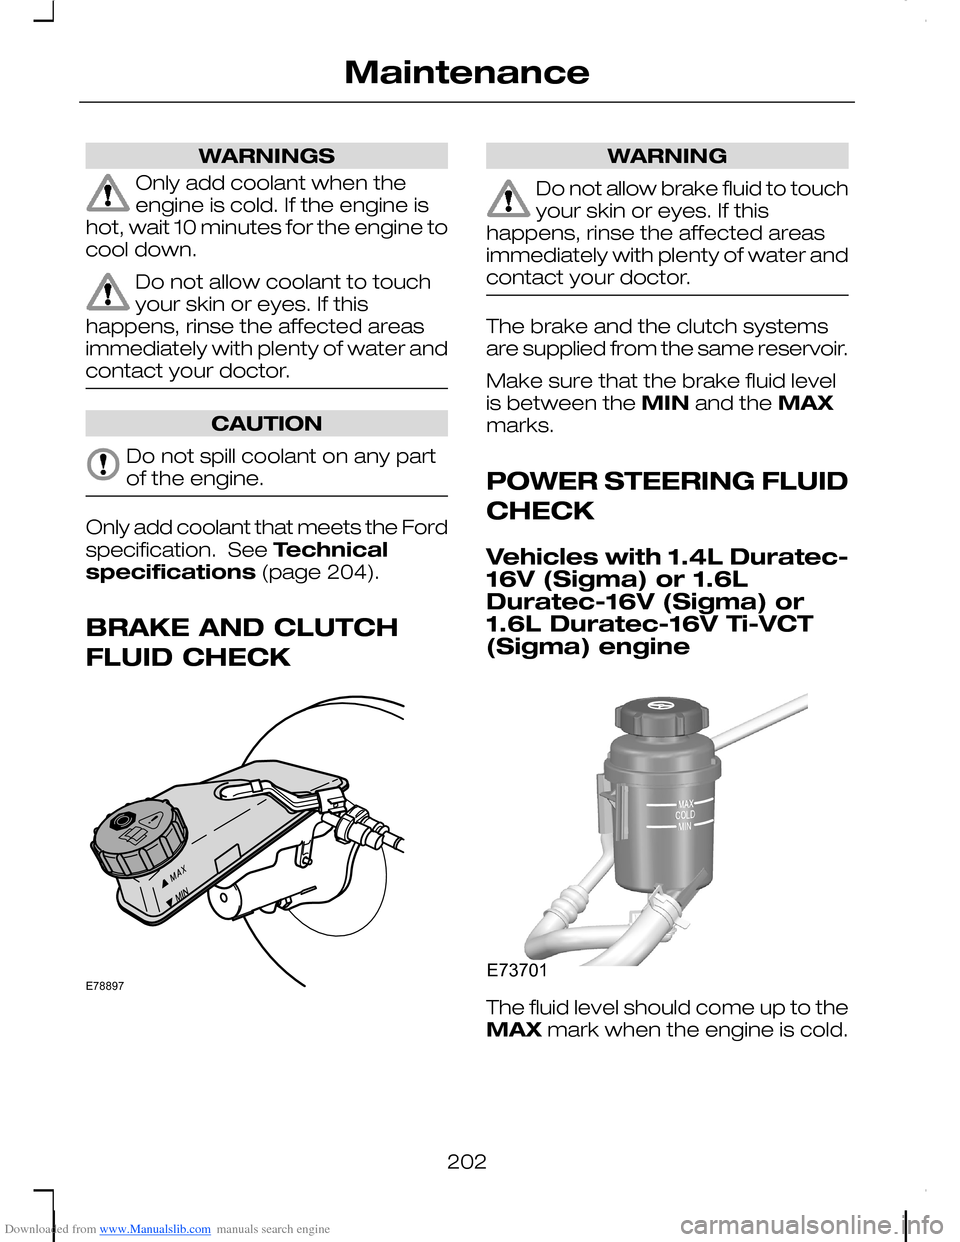 FORD C MAX 2008 1.G Owners Manual Downloaded from www.Manualslib.com manuals search engine WARNINGS
Only add coolant when theengine is cold. If the engine ishot, wait 10 minutes for the engine tocool down.
Do not allow coolant to touc